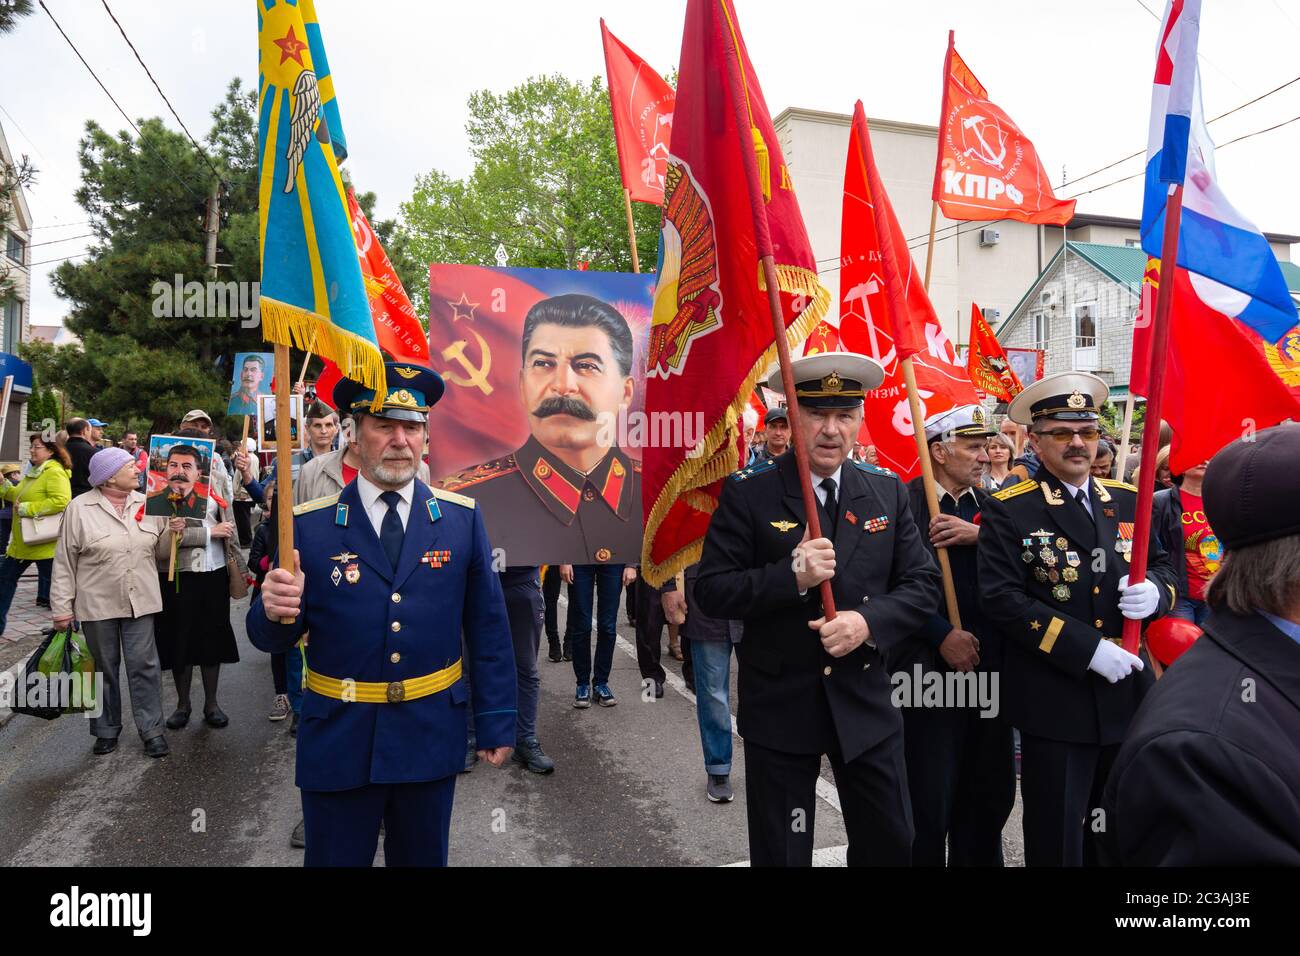 Anapa, Russia - May 9, 2019: Veterans carry a portrait of Stalin at a celebration in honor of Victory Day Stock Photo